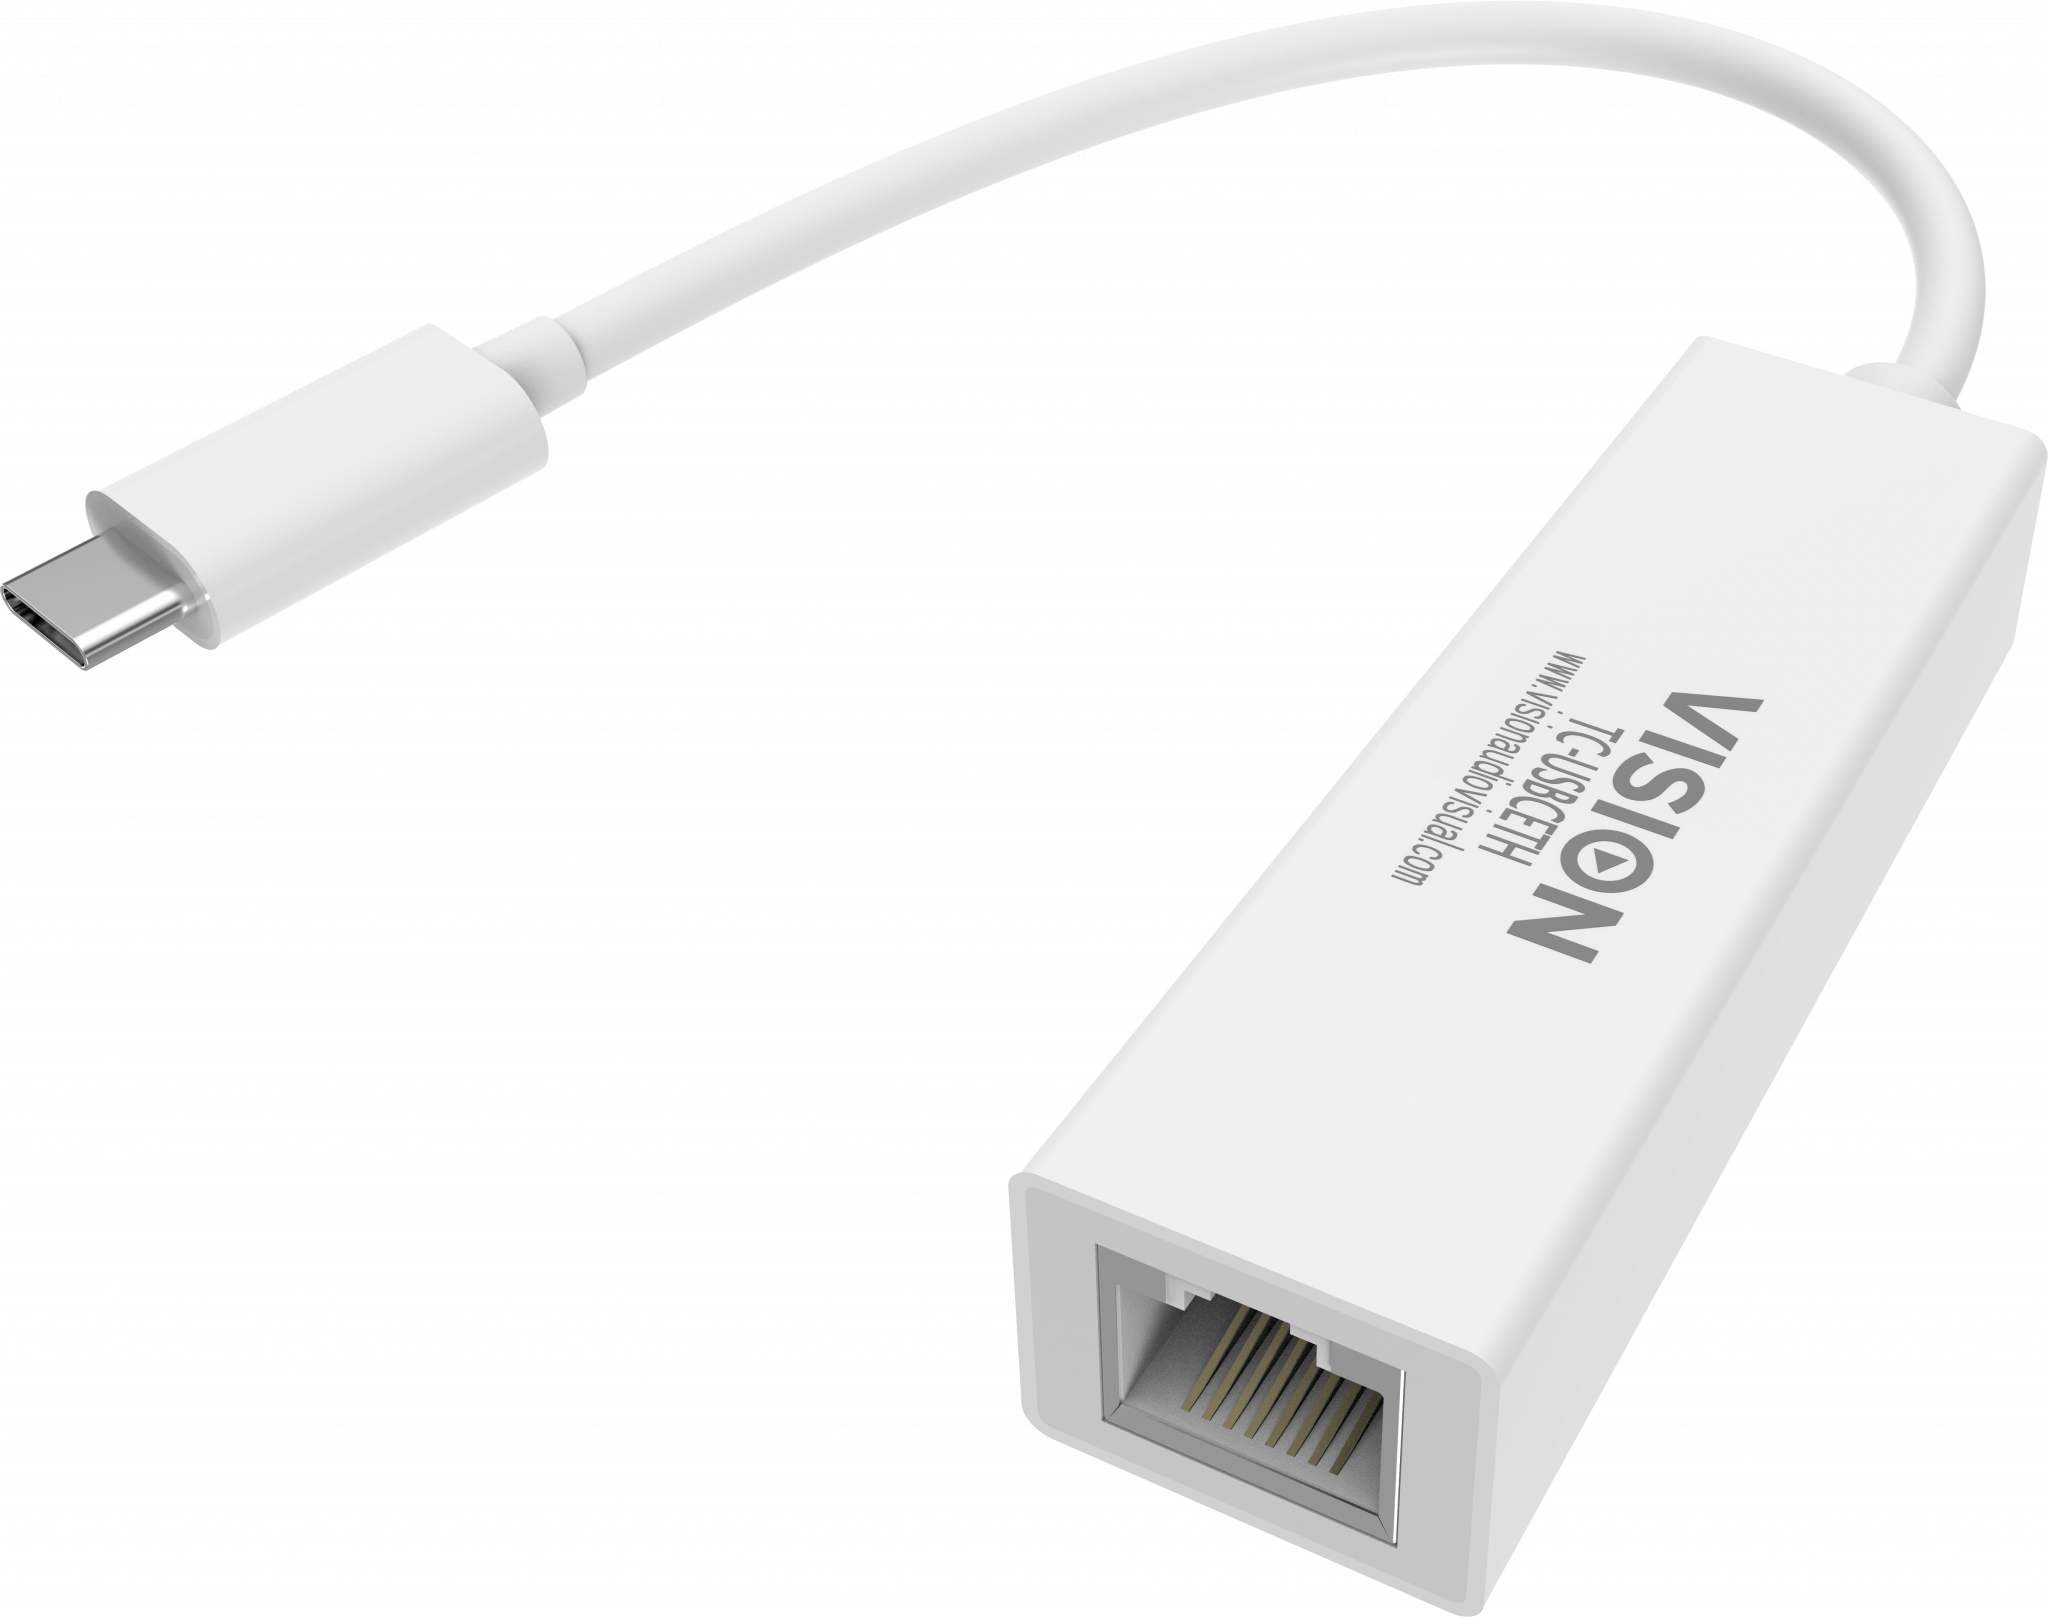 An image showing White USB-C to Ethernet Adaptor